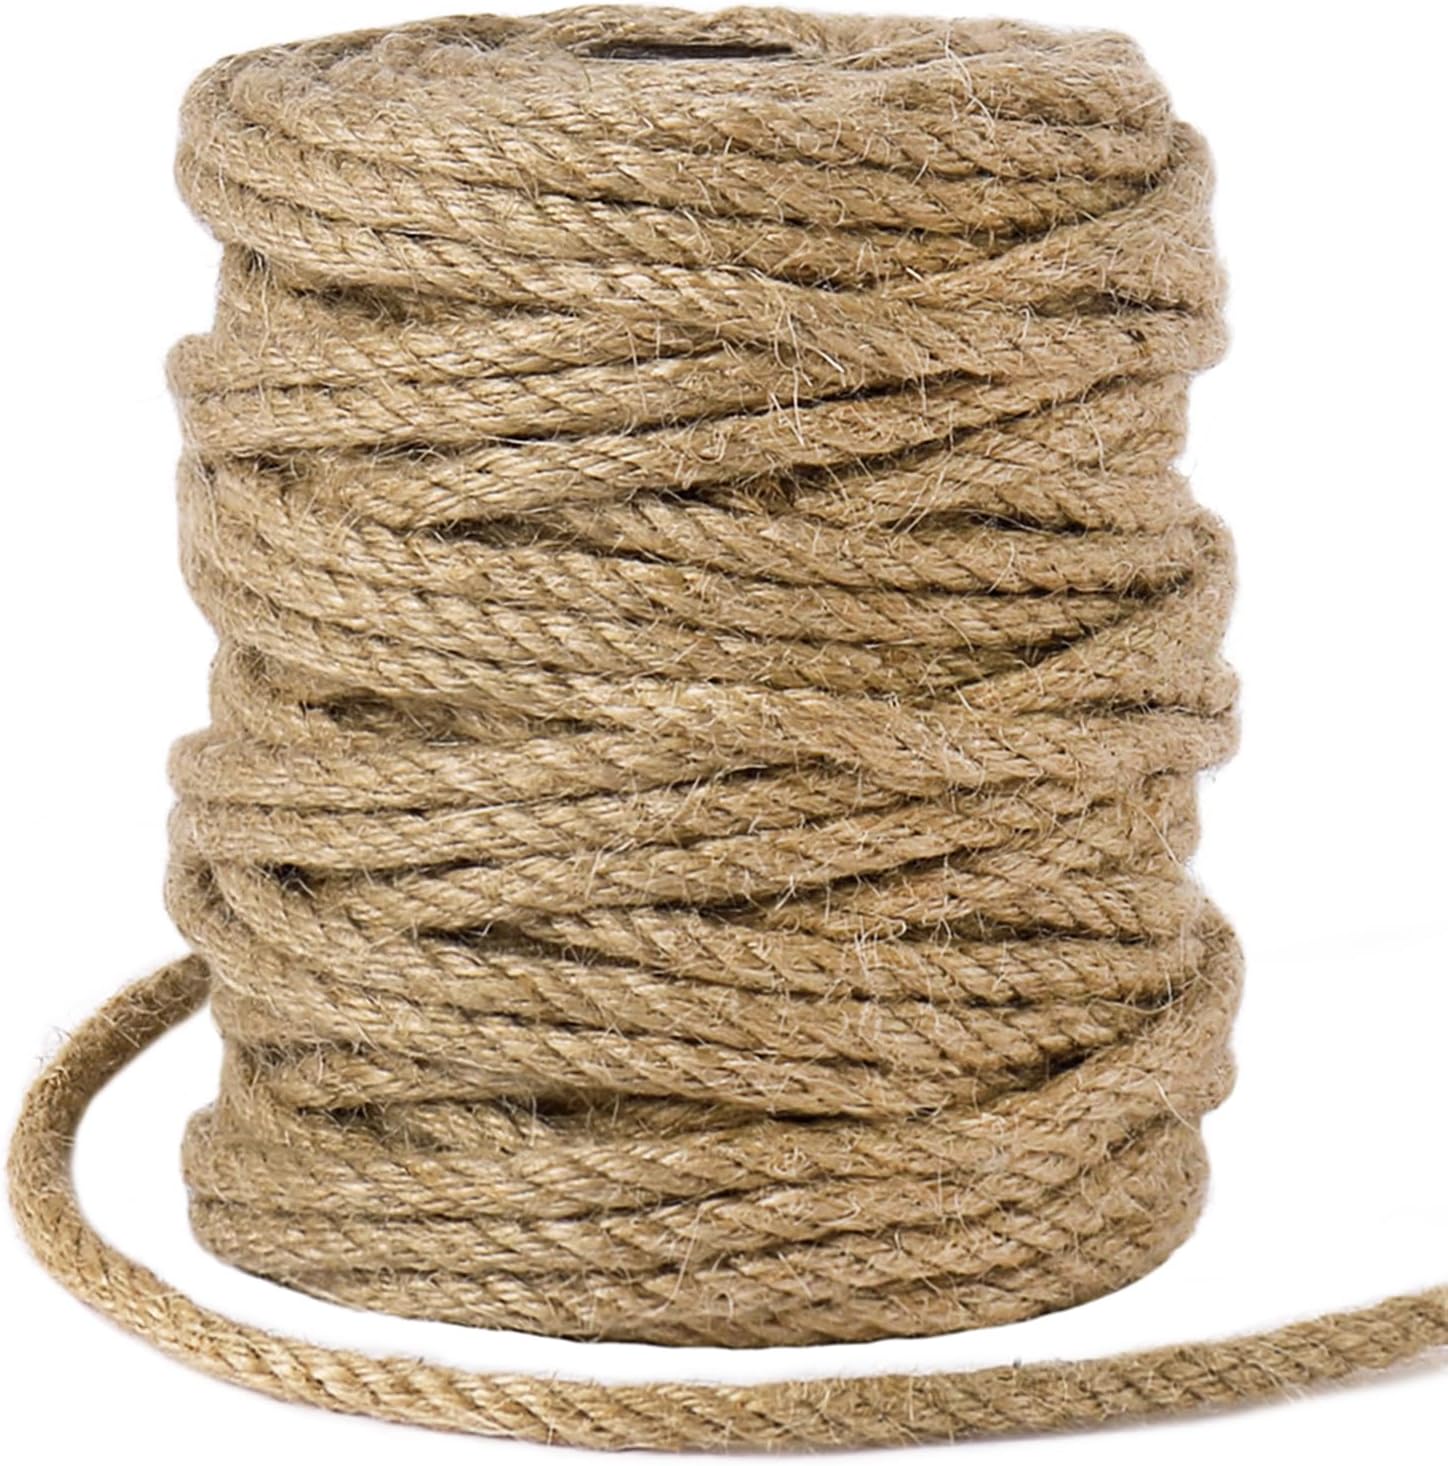 Natural Jute Twine Rope for Crafting (Brown 100 ft)